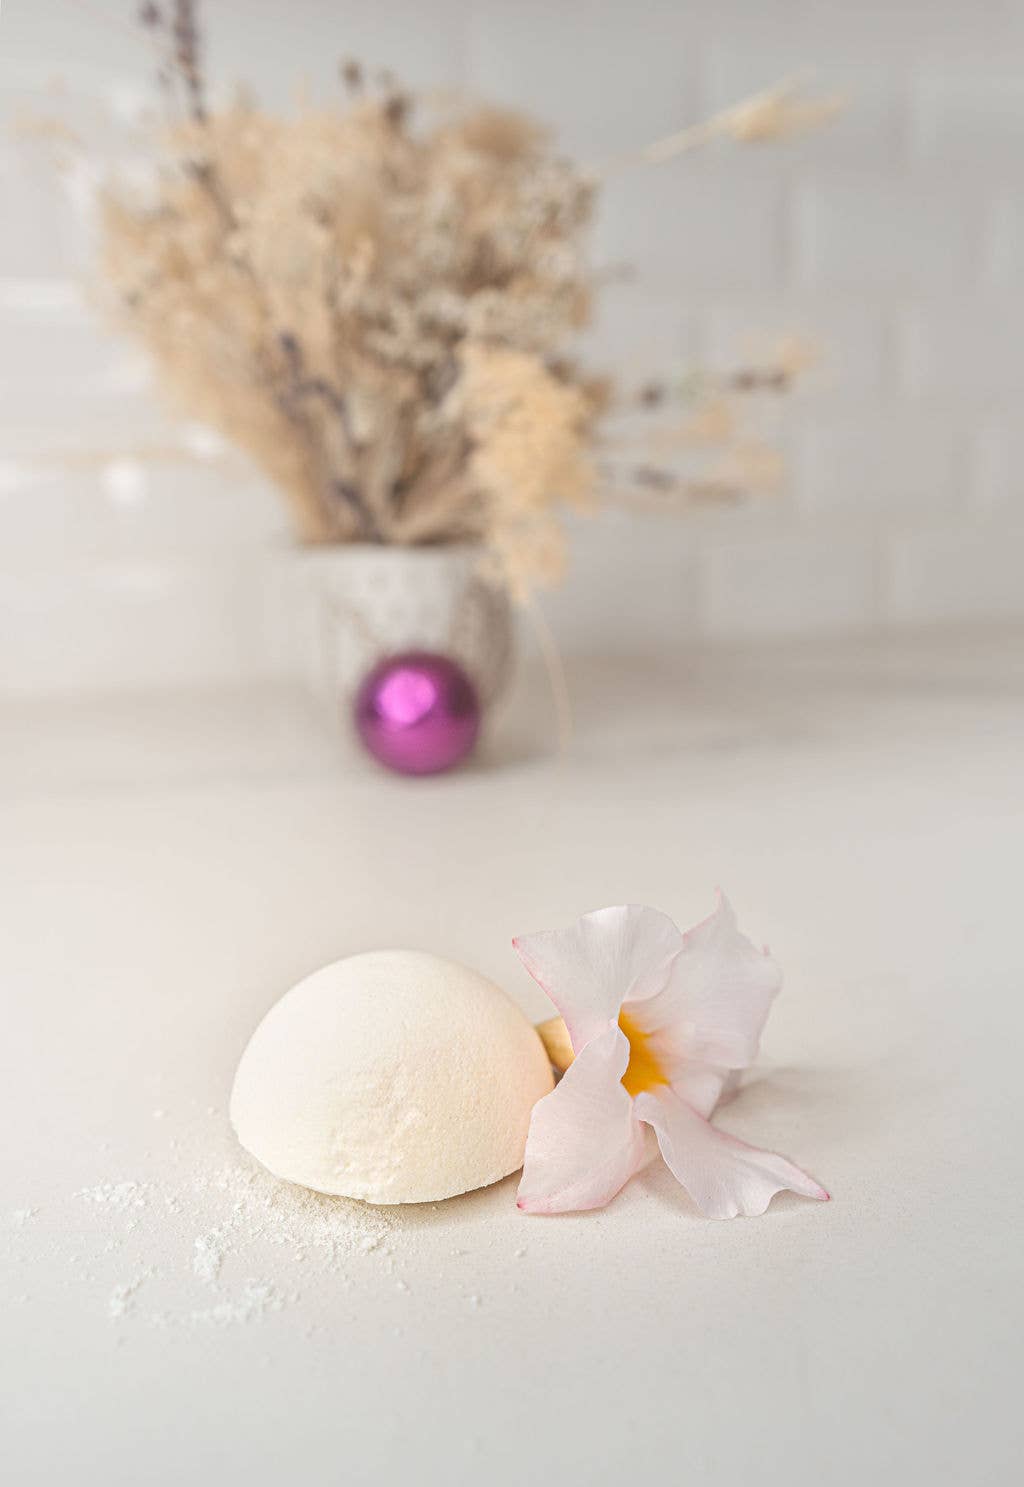 Natural Essential Oil Shower Steamers/Bombs Handmade - Relax